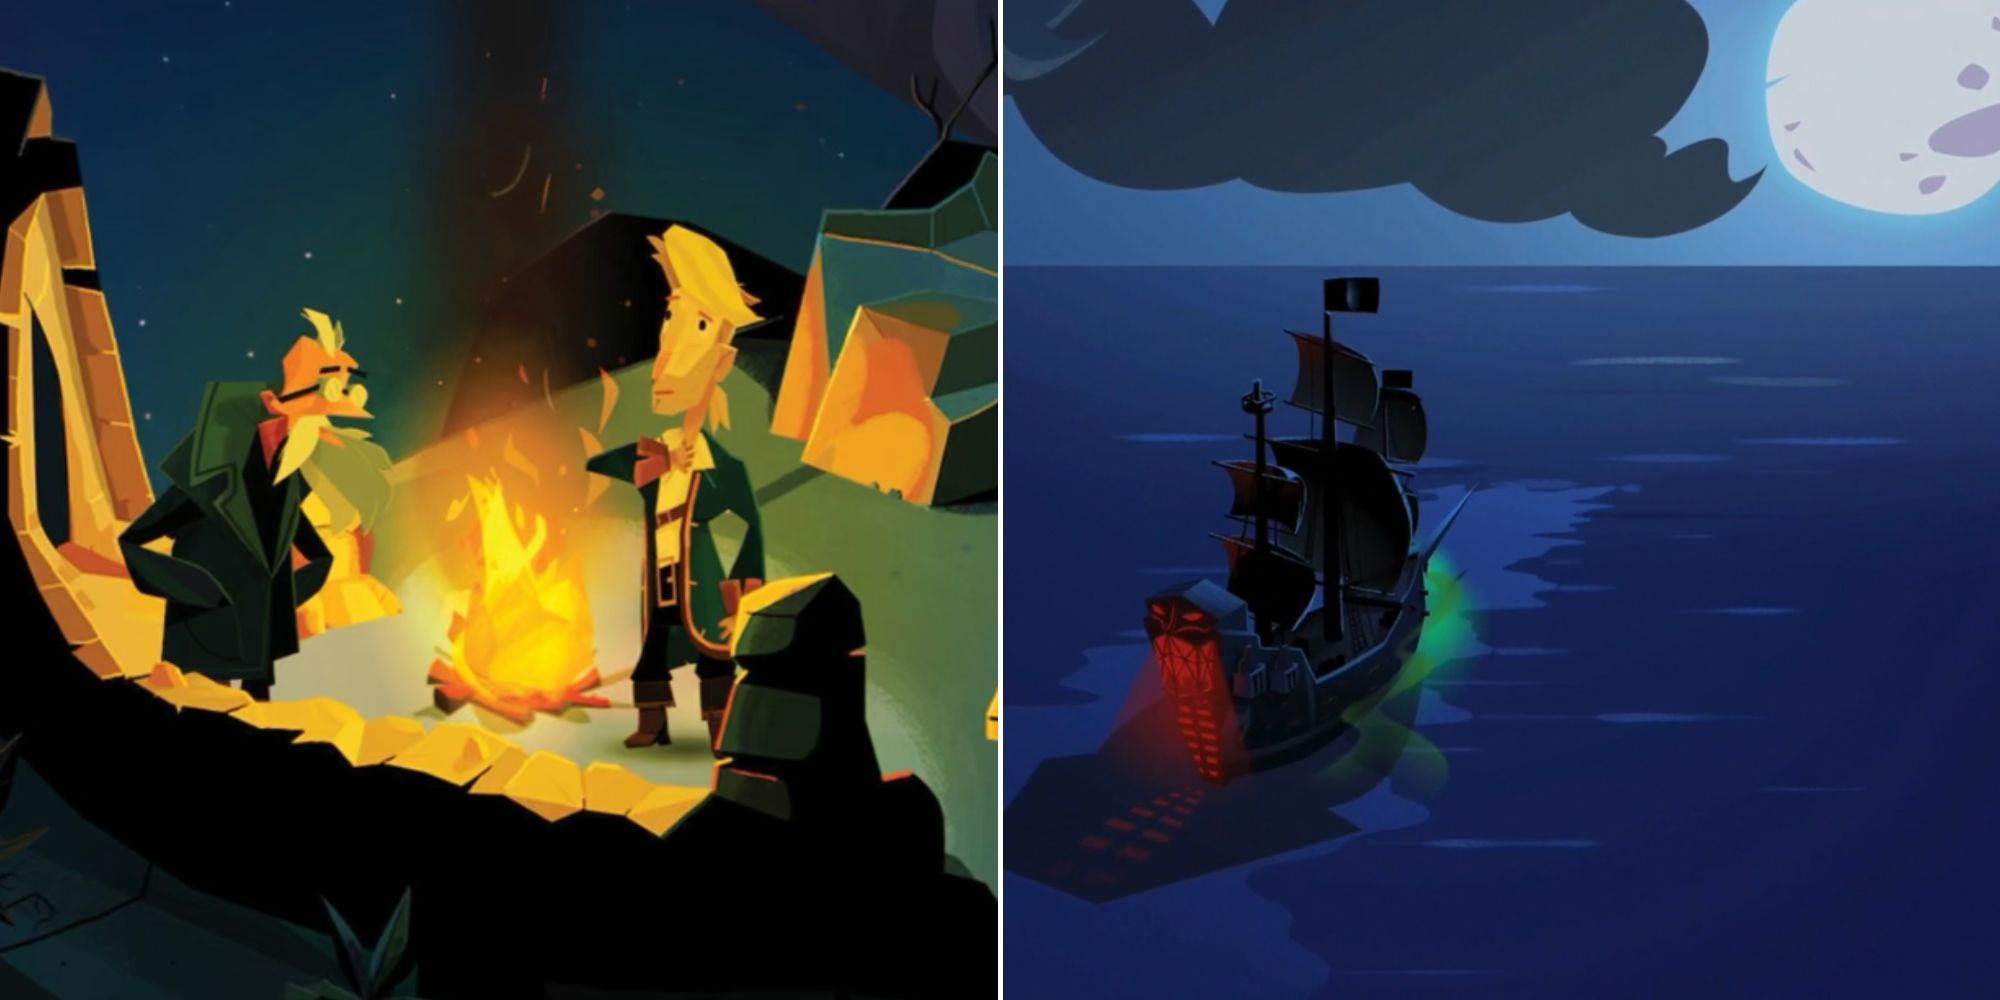 Guybrush Threepwood at a campfire and a pirate ship sailing off at night in Return To Monkey Island